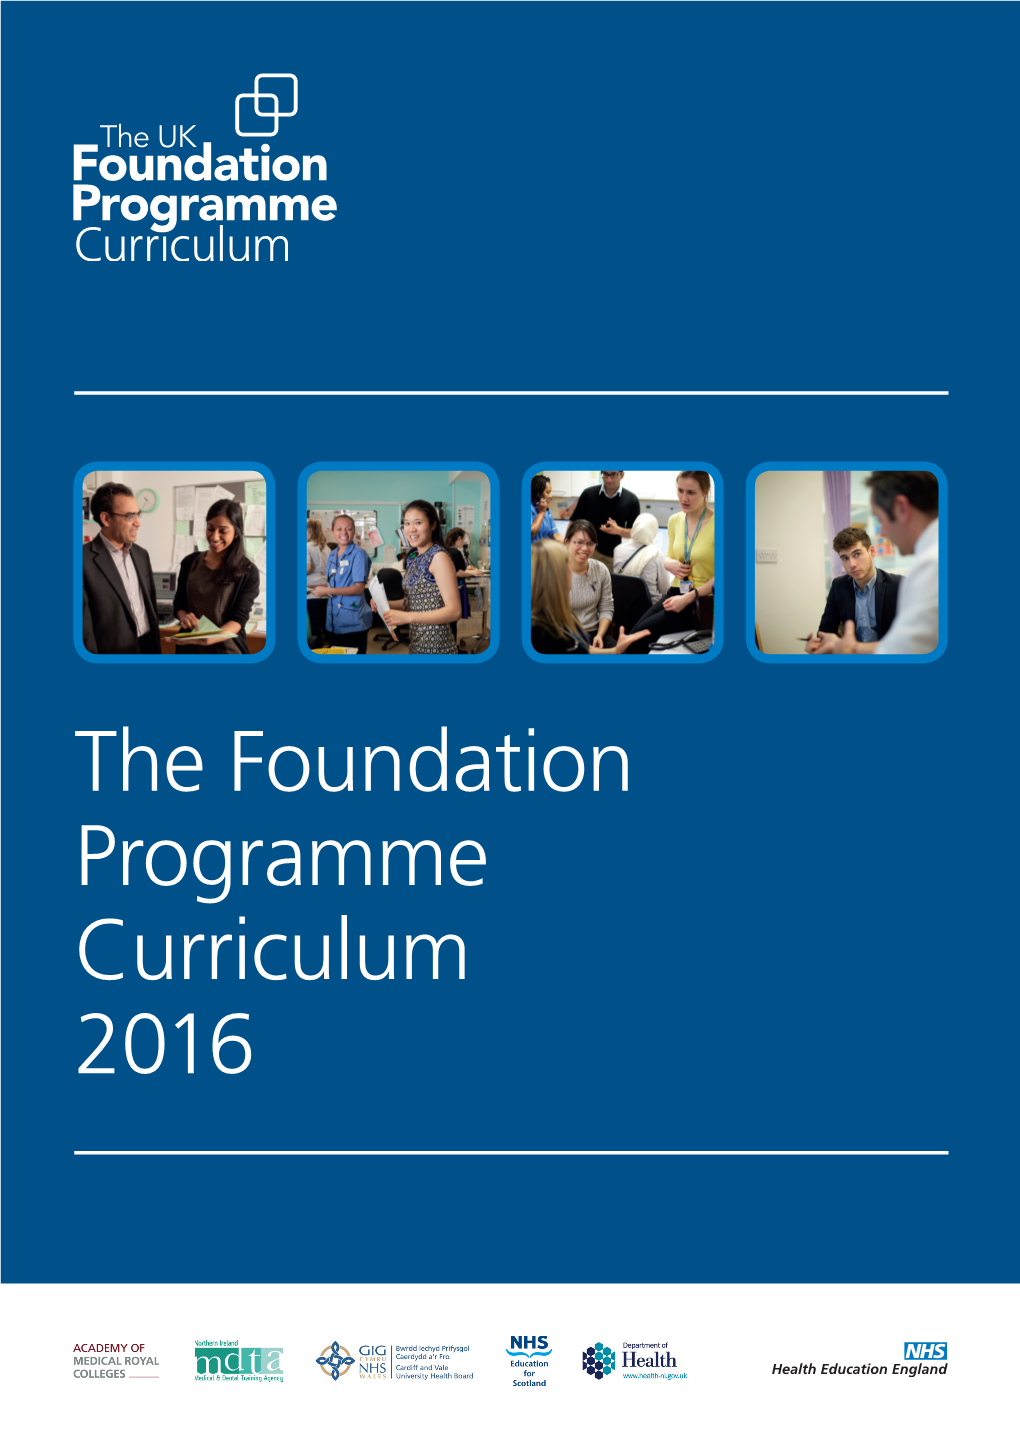 The Foundation Programme Curriculum 2016 Contents